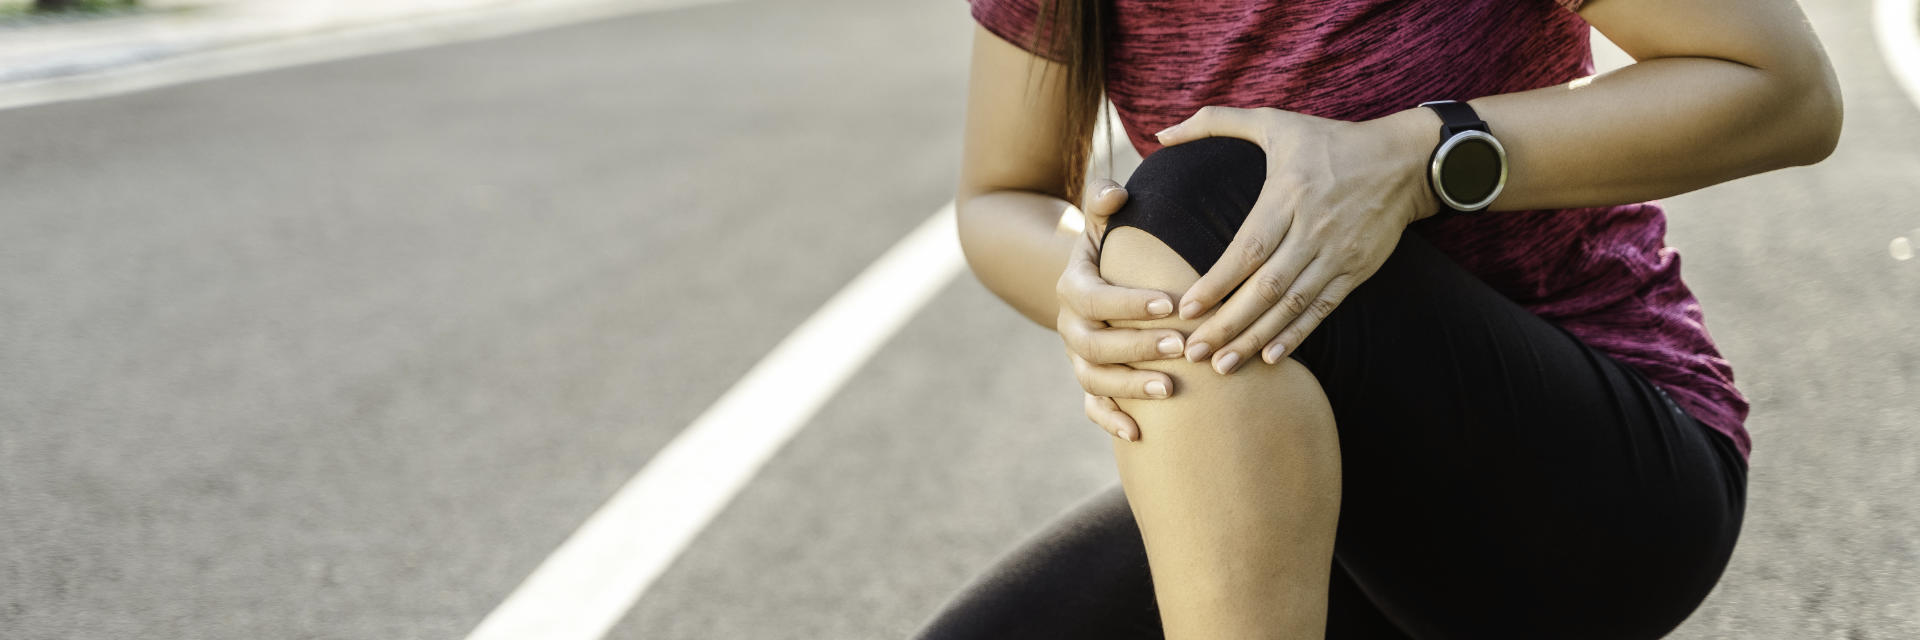 A running woman stopped by knee pain.